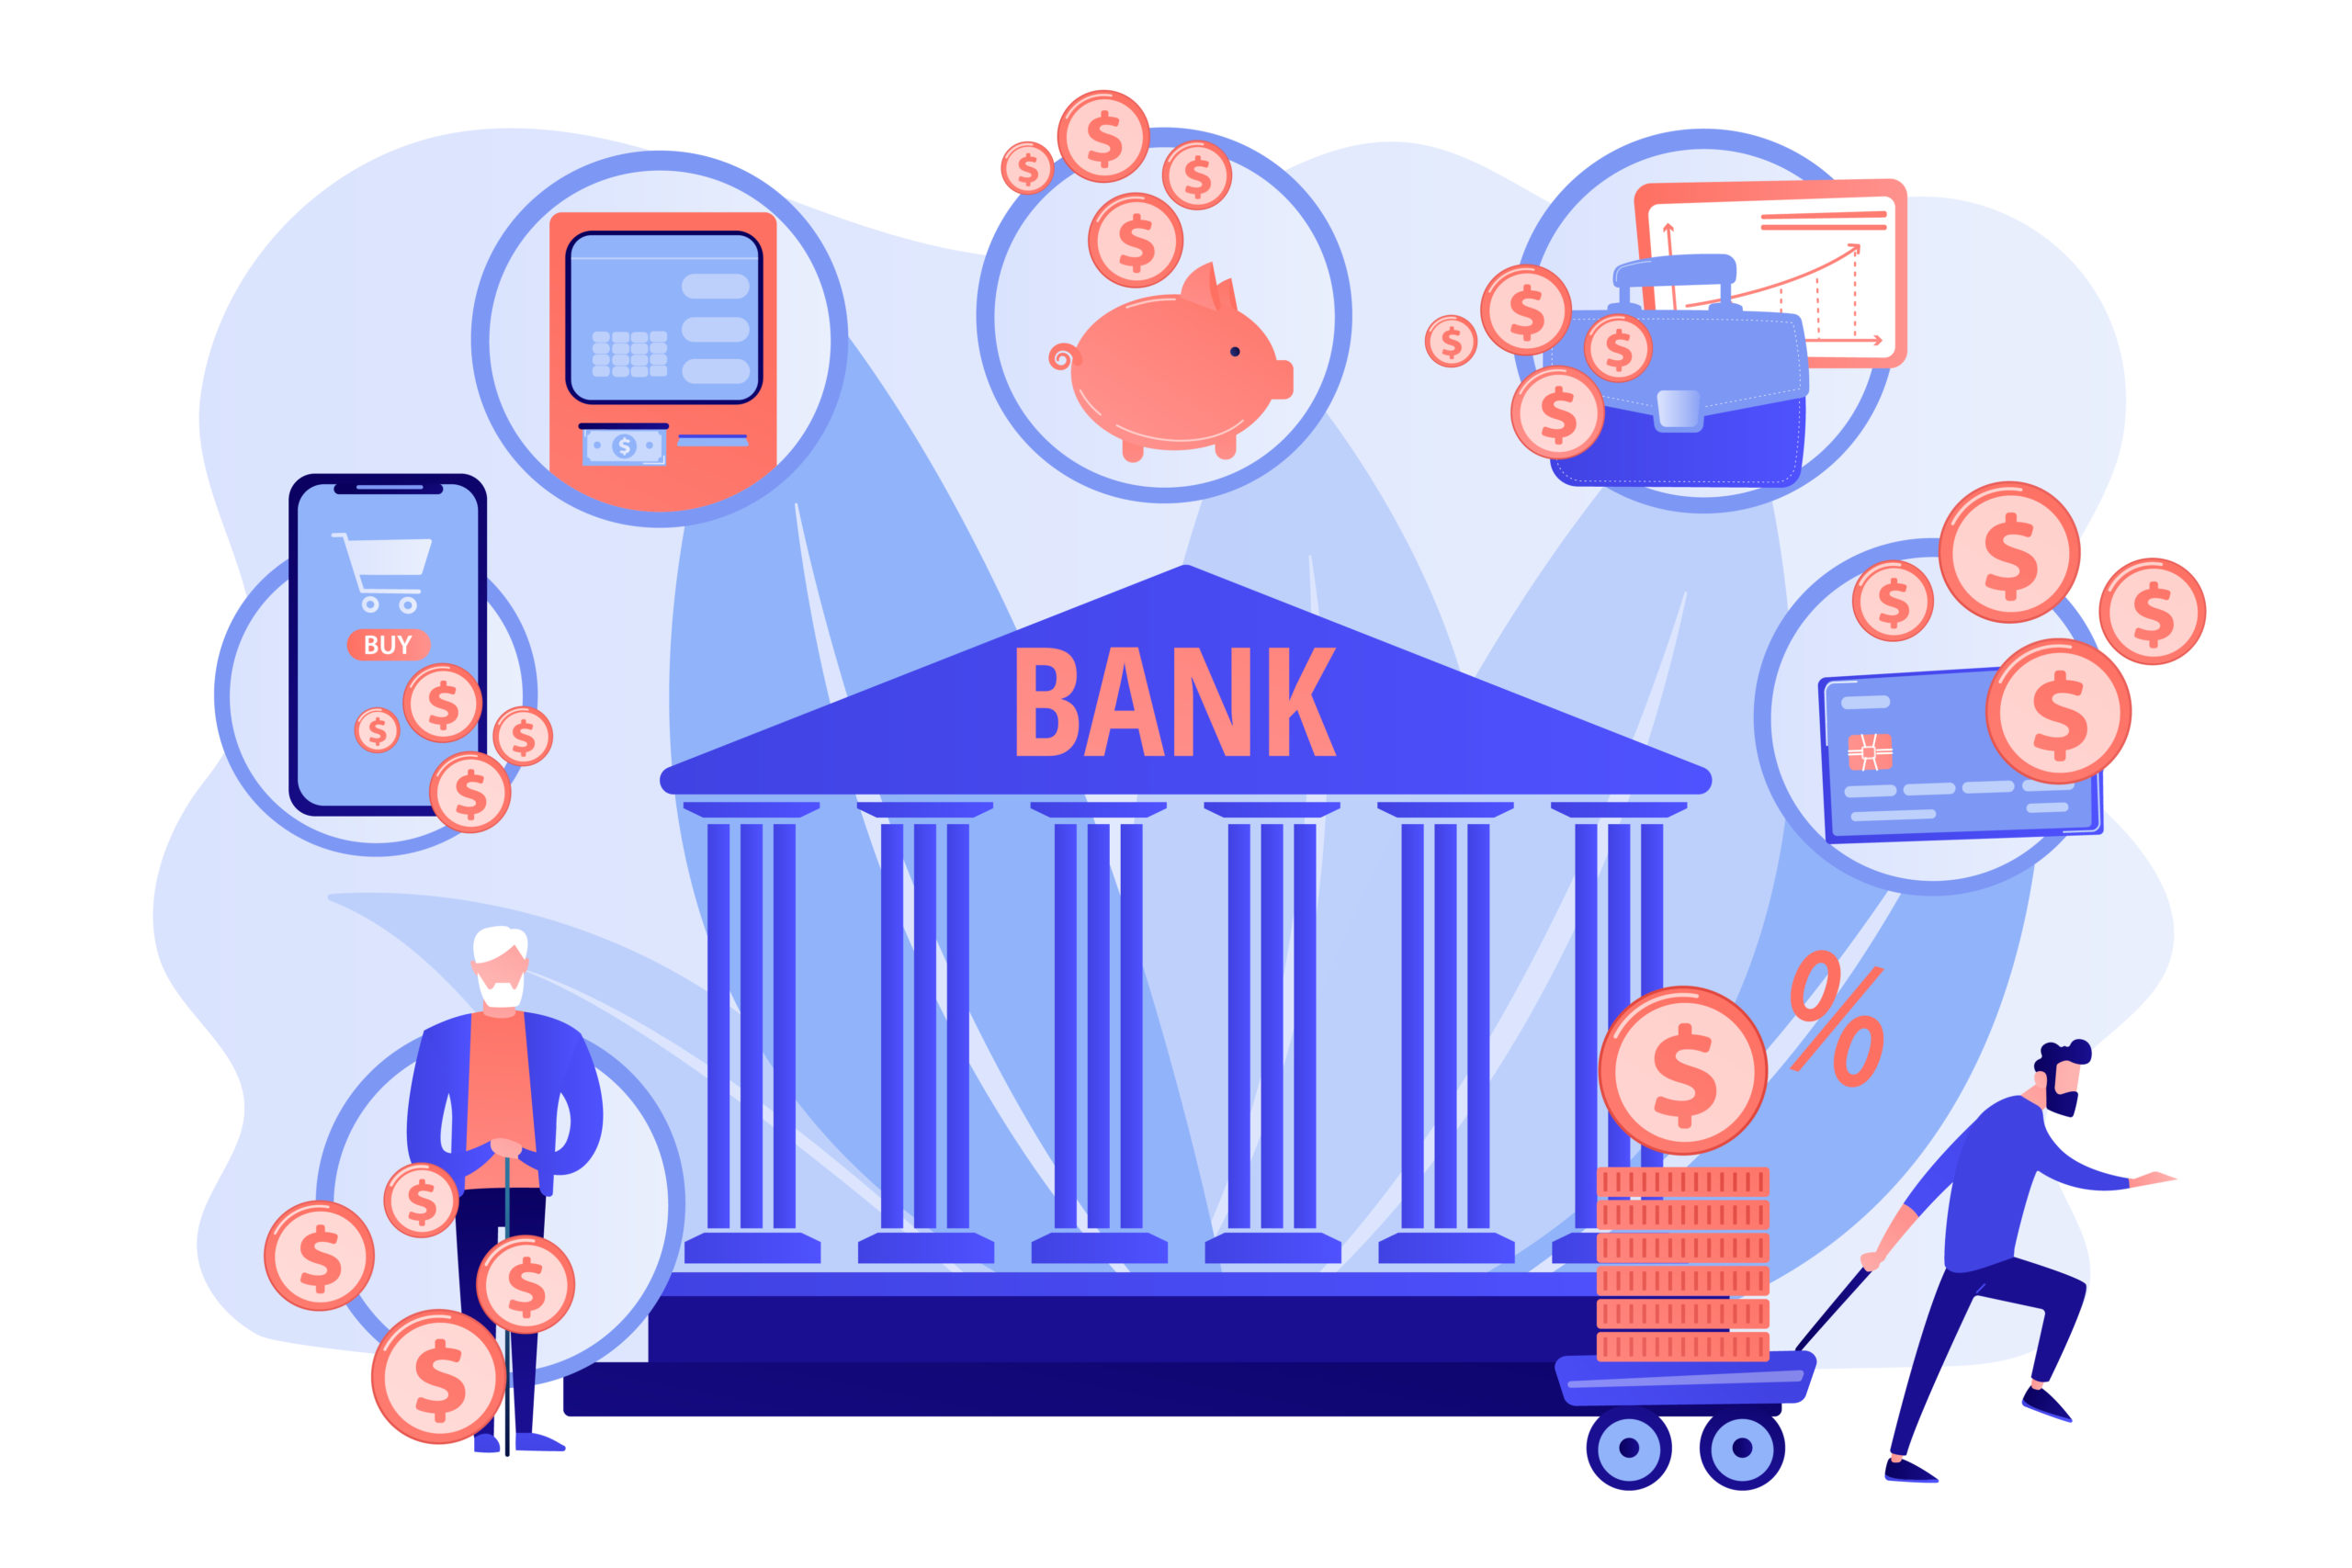 BANKING 101: UNDERSTANDING THE BANKING SYSTEM